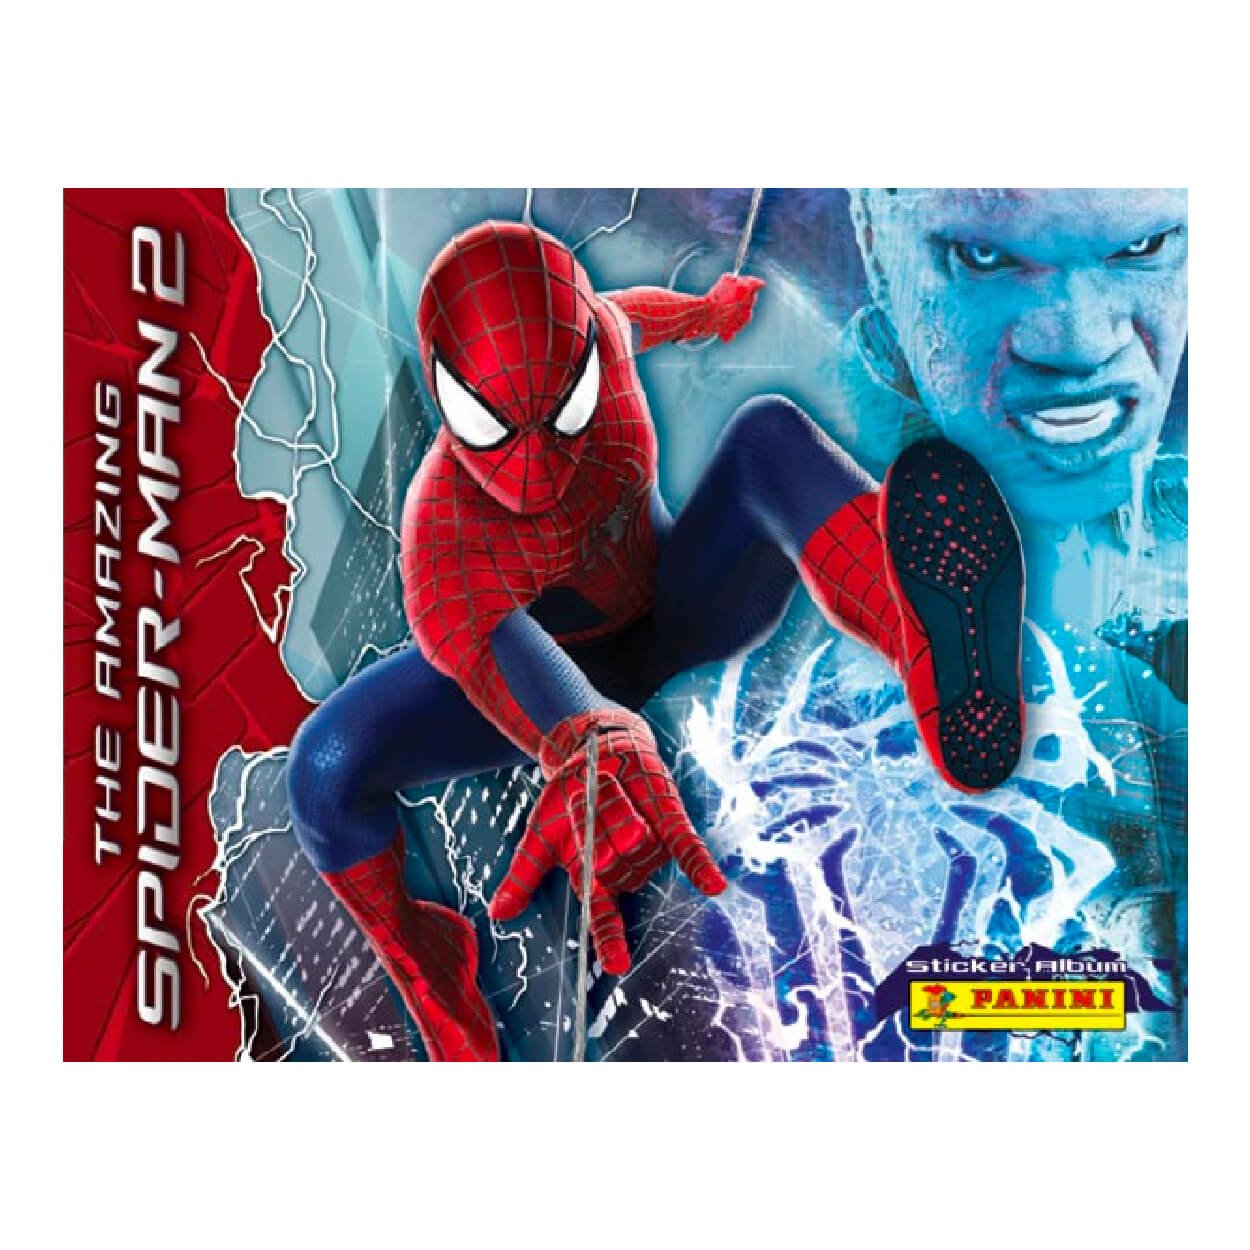 EarthletsAmazing Spiderman Sticker CollectionProduct: Starter PackSticker CollectionEarthlets